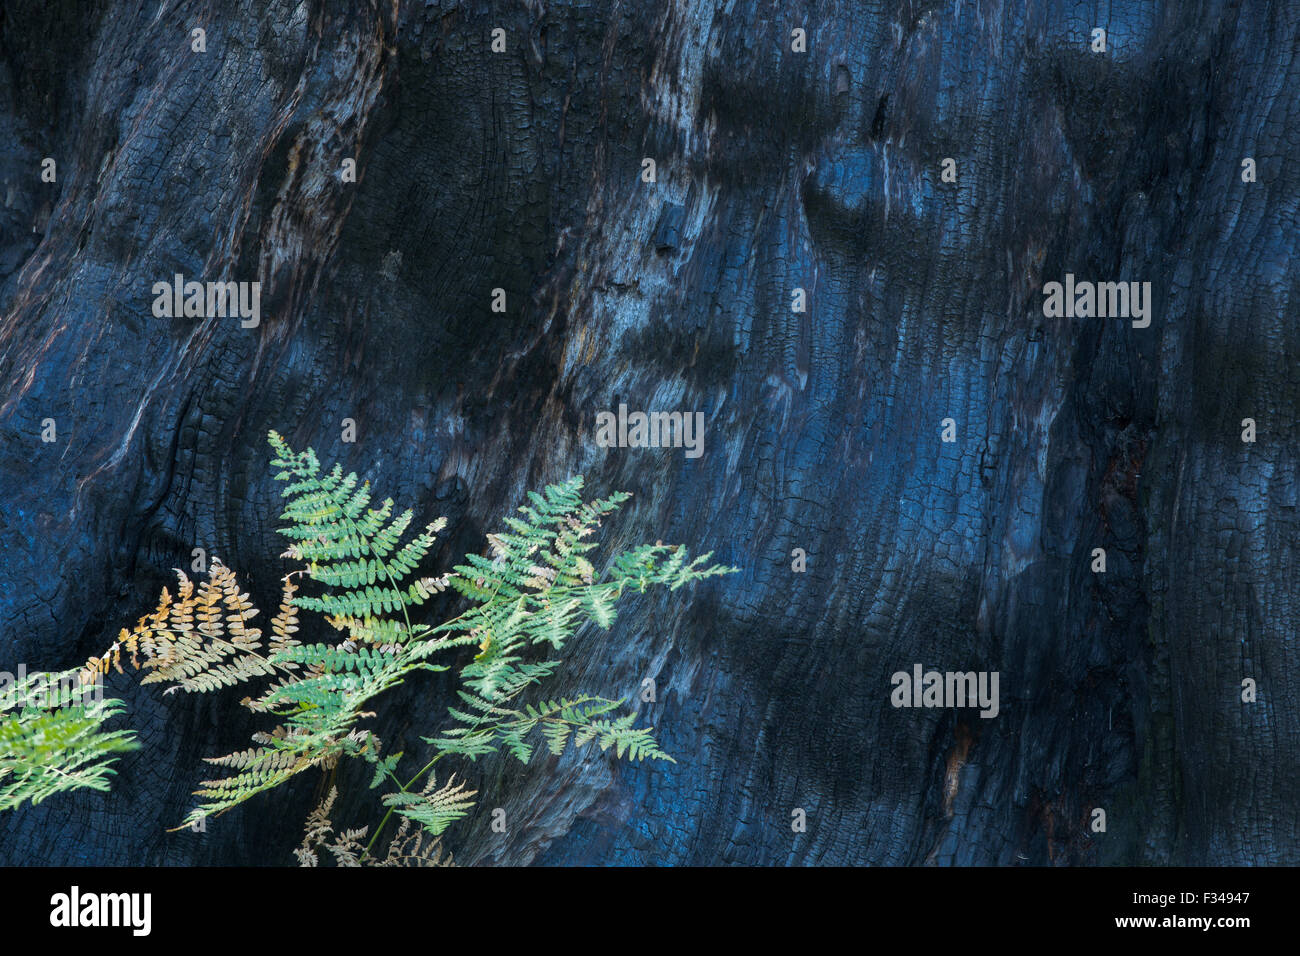 life and death fresh growth beside the scorched trunk of a sequoia tree killed by forest fire Crescent Meadow Sequoia National Stock Photo